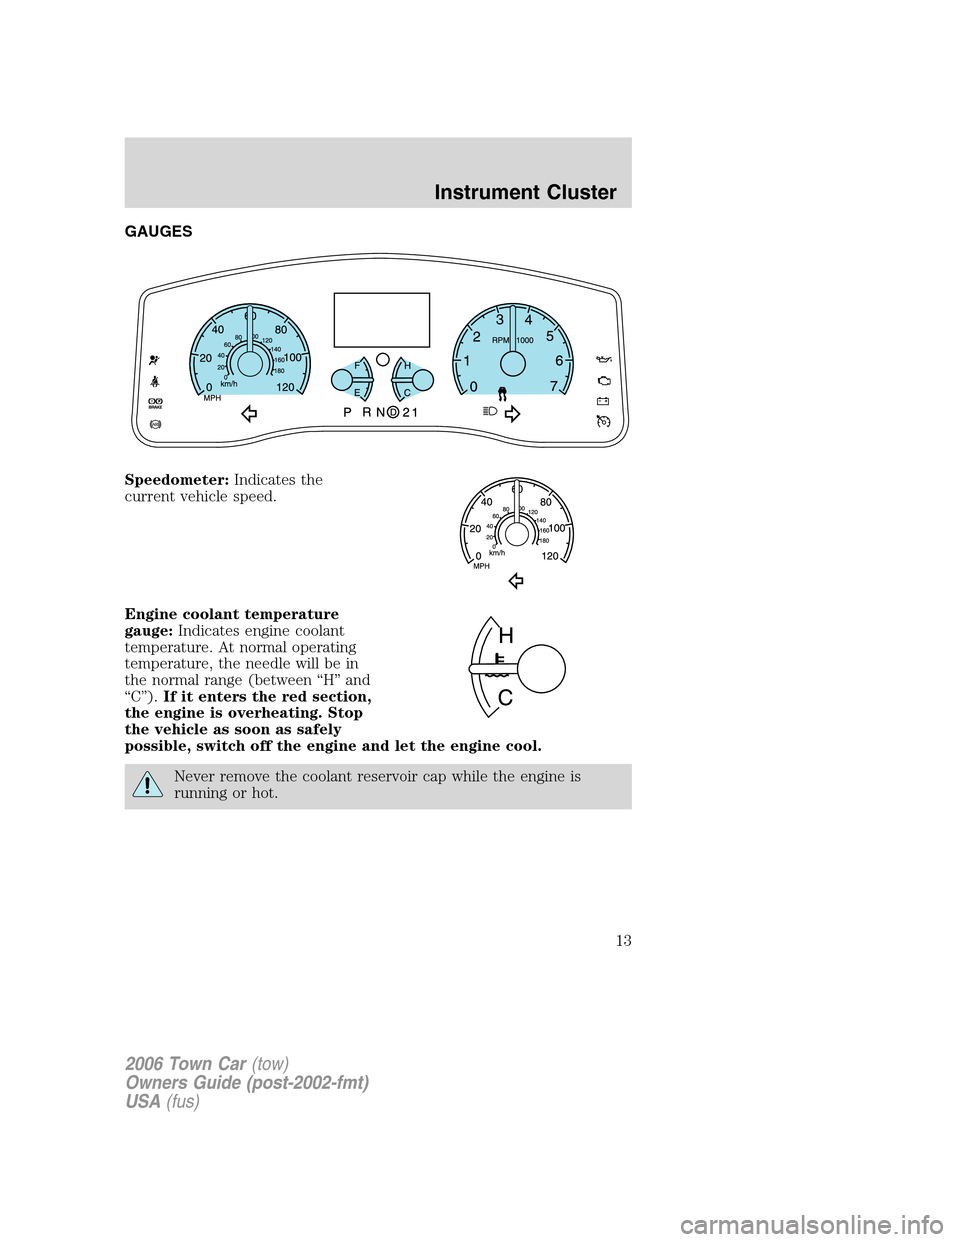 LINCOLN TOWN CAR 2006 User Guide GAUGES
Speedometer:Indicates the
current vehicle speed.
Engine coolant temperature
gauge:Indicates engine coolant
temperature. At normal operating
temperature, the needle will be in
the normal range (